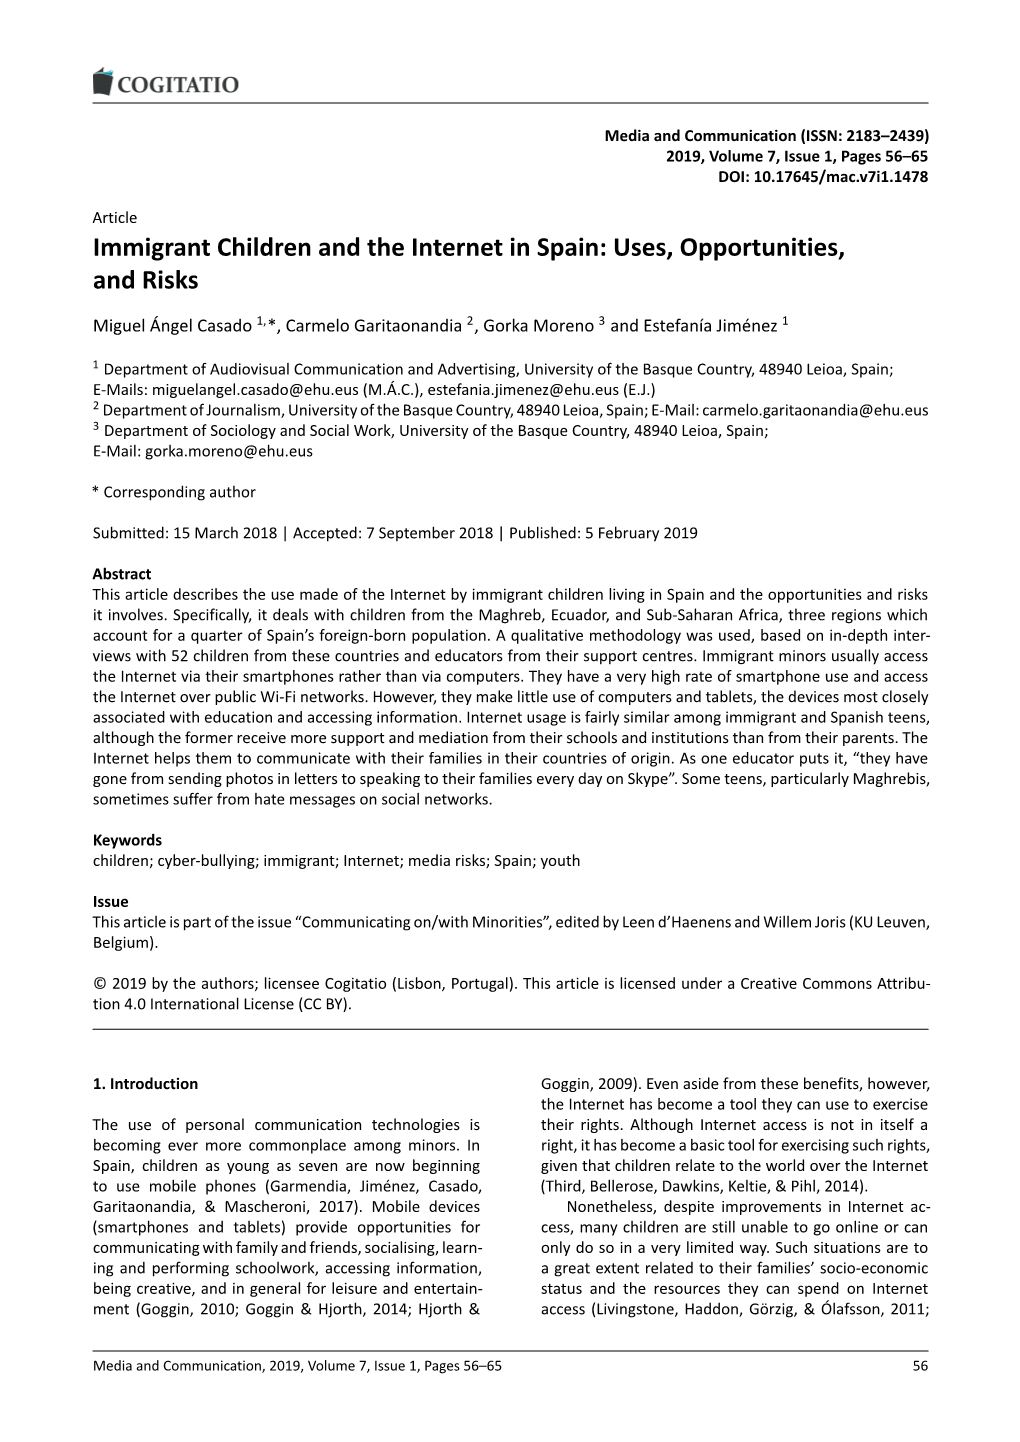 Immigrant Children and the Internet in Spain: Uses, Opportunities, and Risks